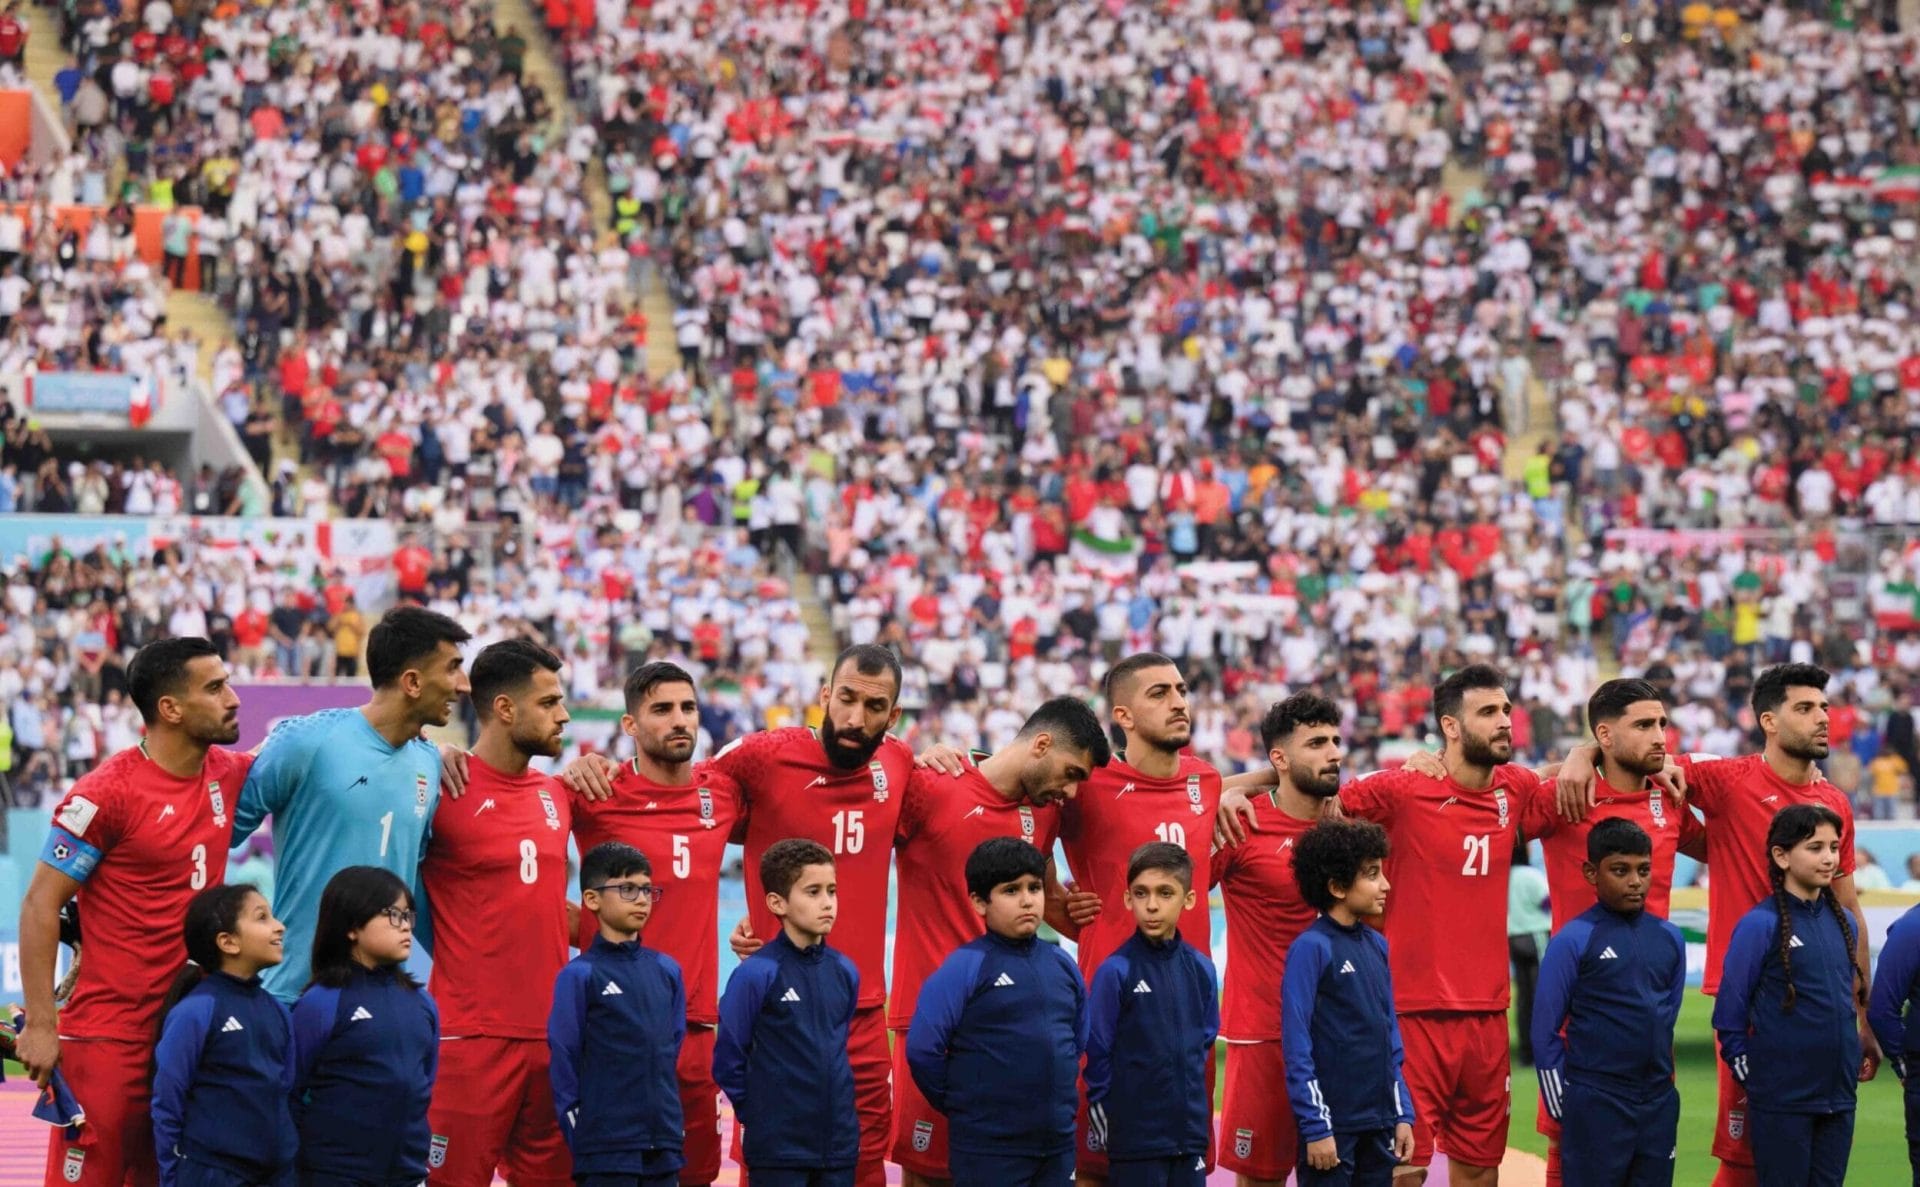 Iranian players line up for the national anthem ahead of the match against England at the Khalifa International Stadium on 21st November 2022